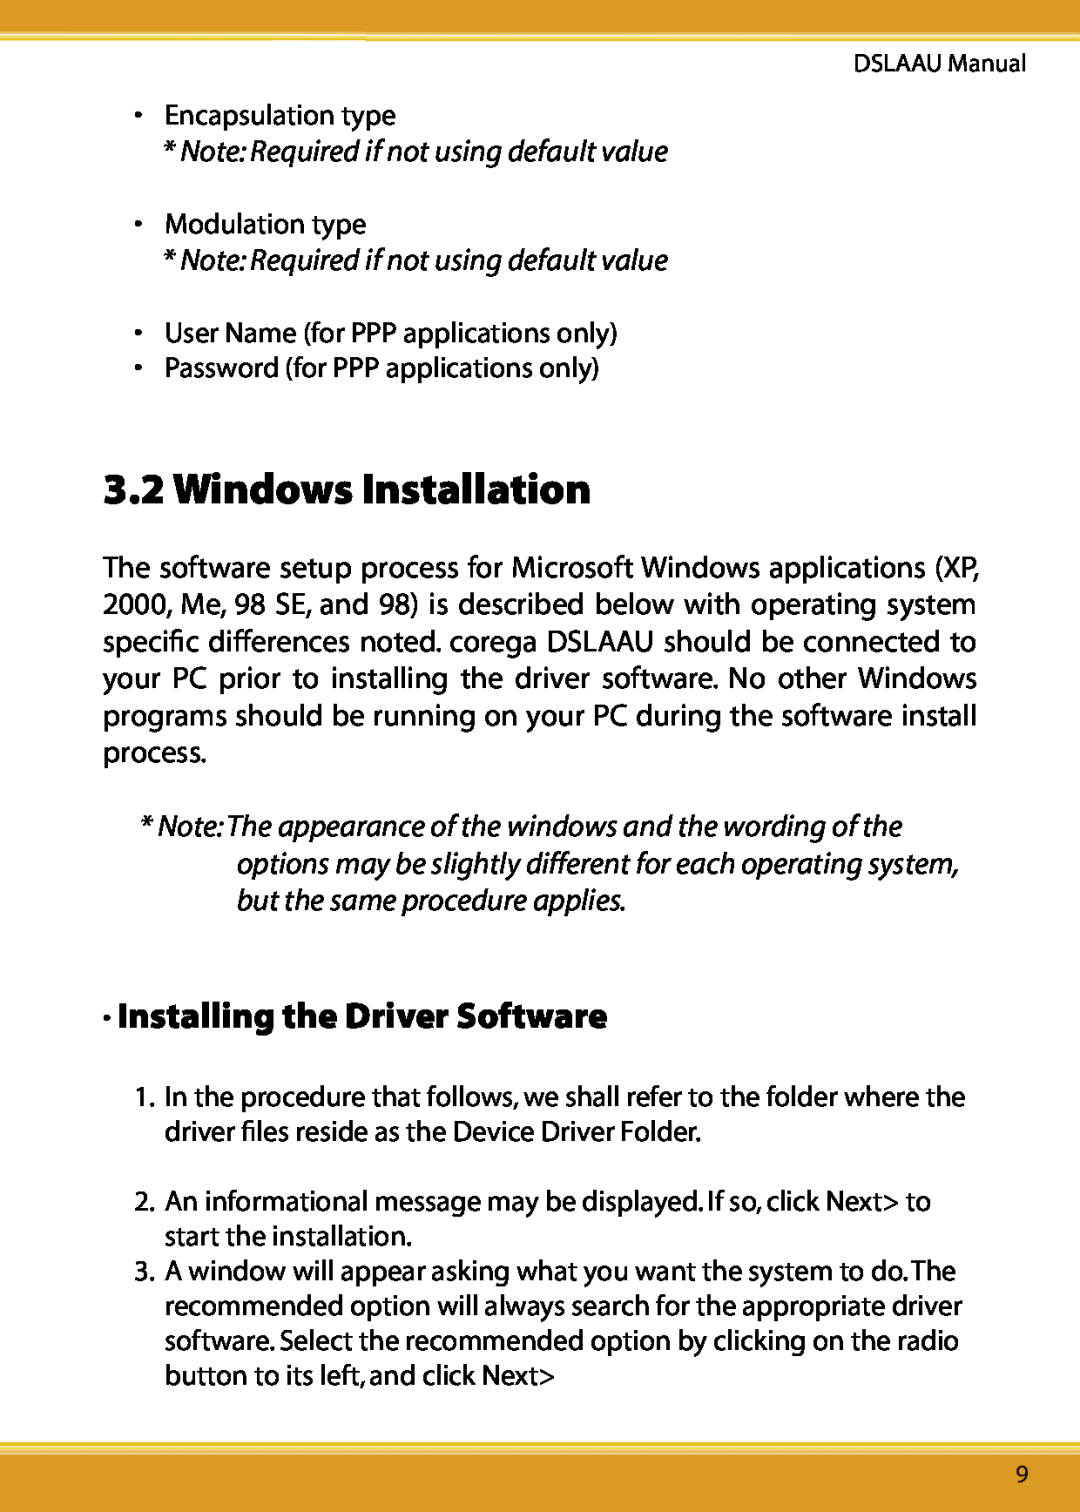 Corega DSLAAU user manual Windows Installation, Installing the Driver Software, Note Required if not using default value 